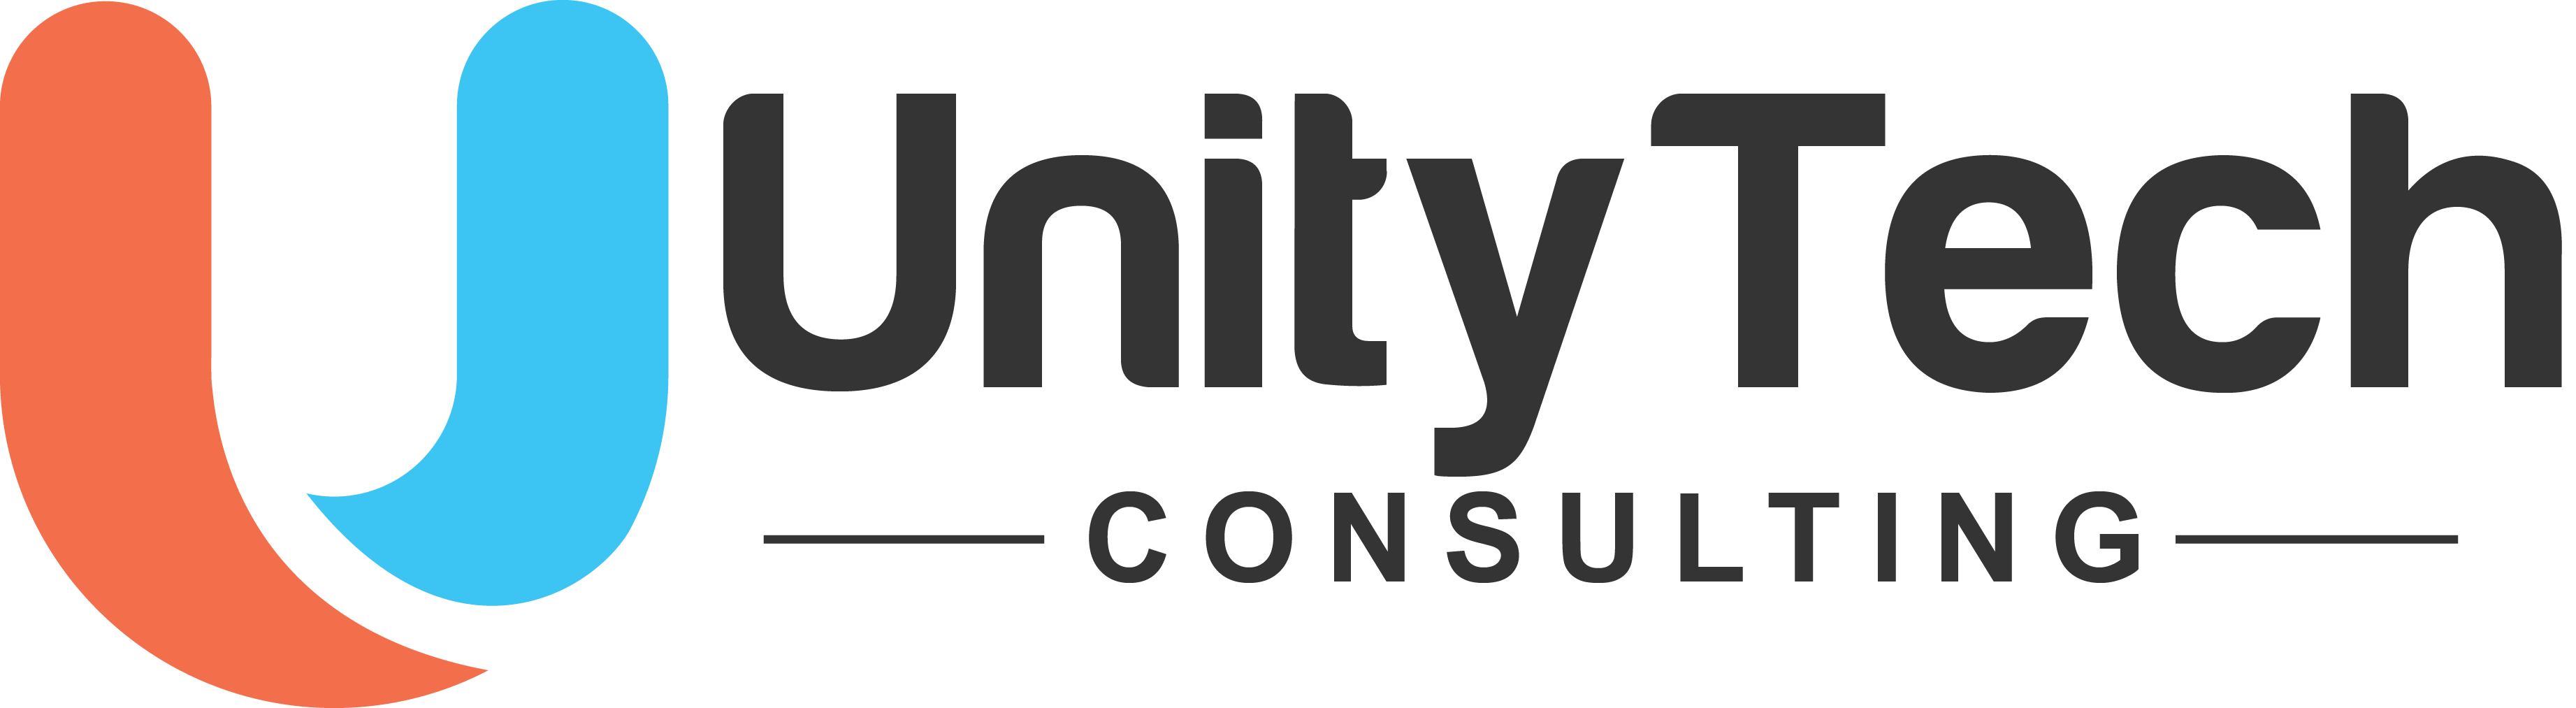 Unity Tech Consulting 